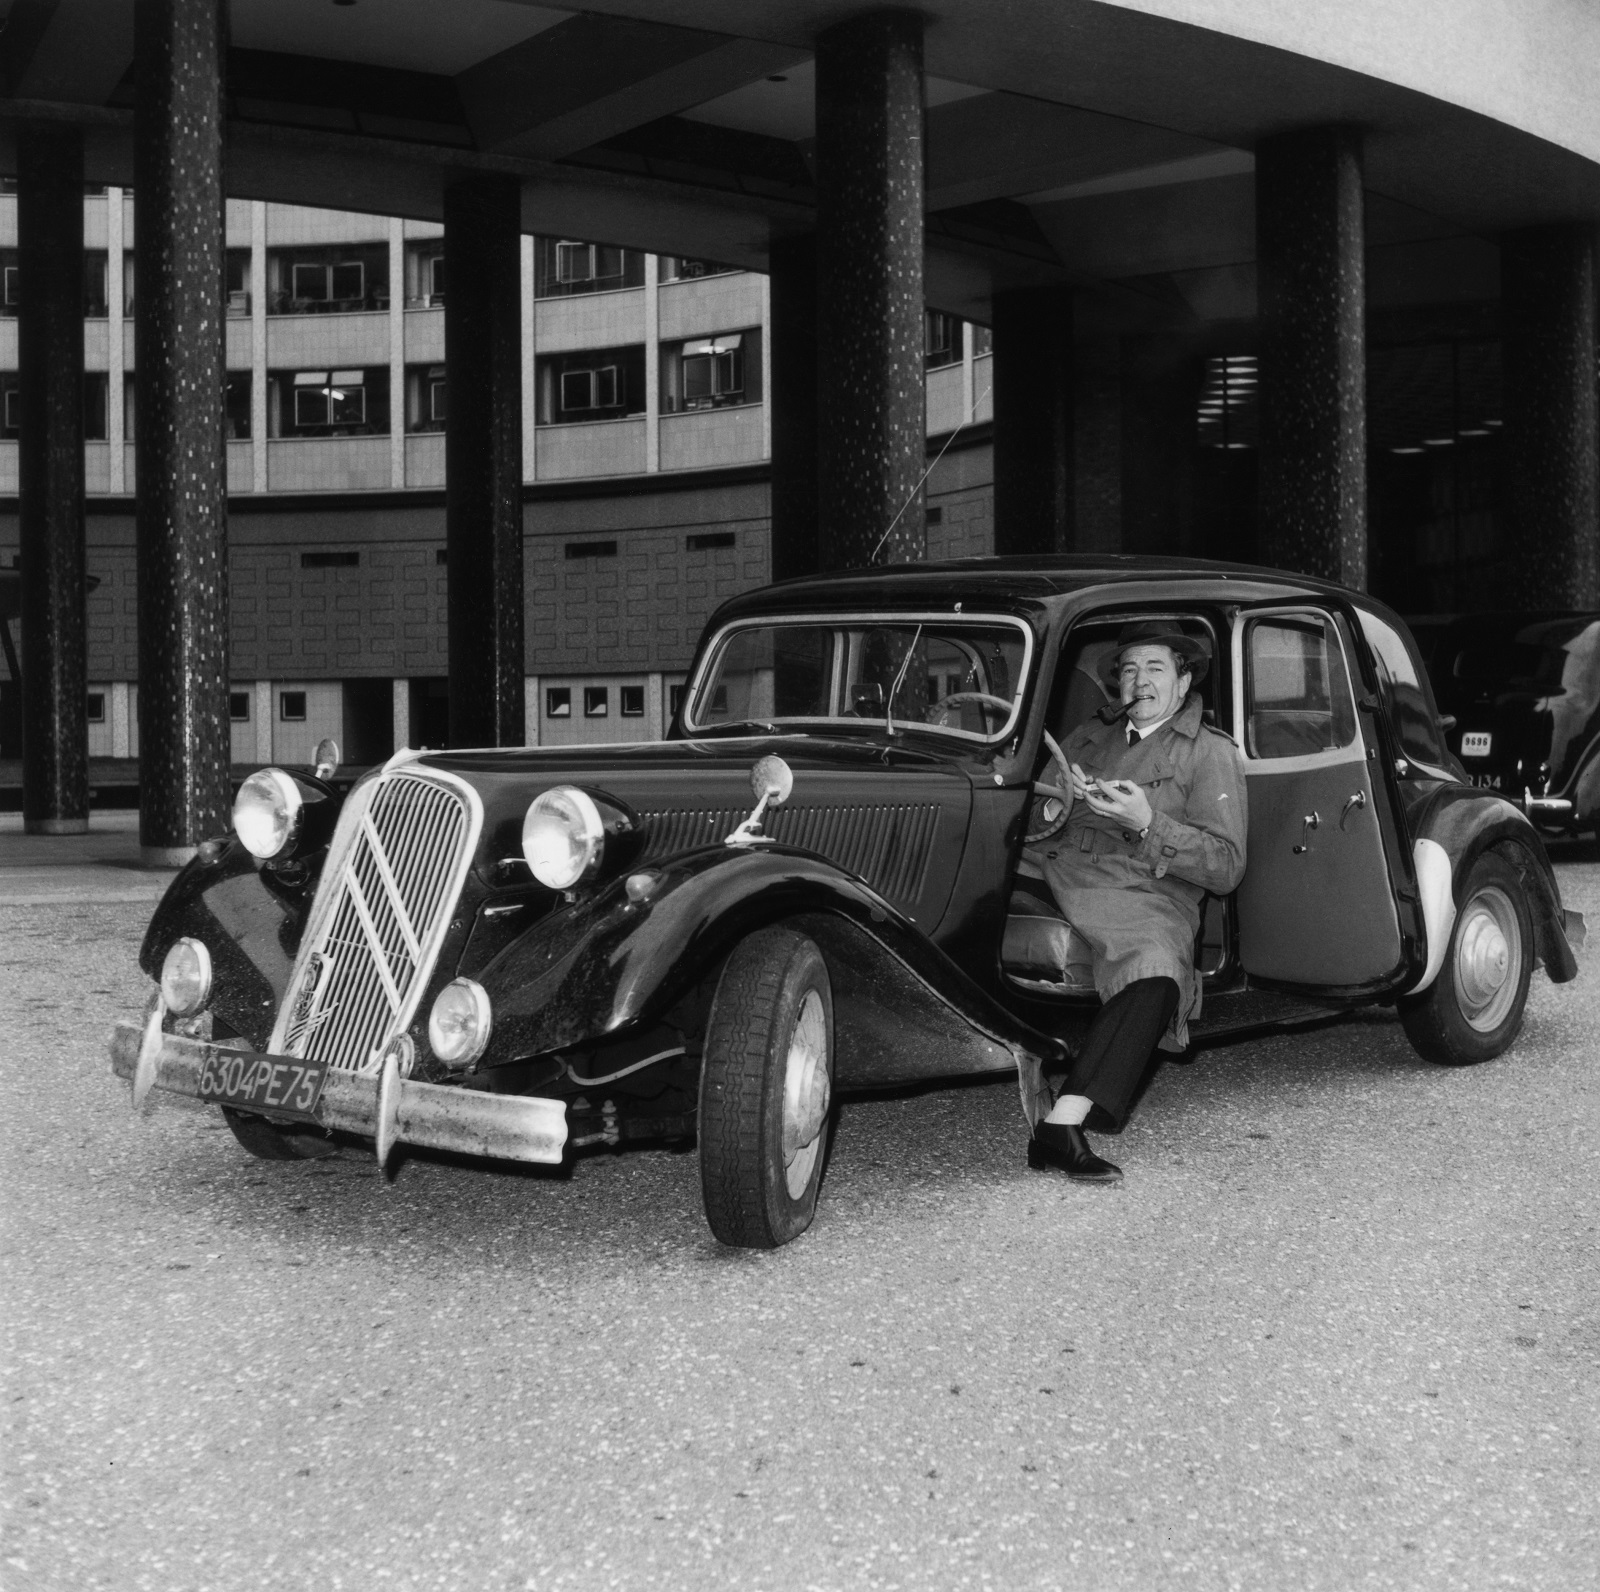 English actor Rupert Davies (1916 - 1976) at the BBC Television Centre 30th September 1963 with the Citroen Traction Avant car used in the television series, 'Maigret', based on the detective novels of Georges Simenon. Davies, who stars in the series as Inspector Maigret, grew attached to the car and decided to buy it. (Photo by Reg Speller/Fox Photos/Hulton Archive/Getty Images)